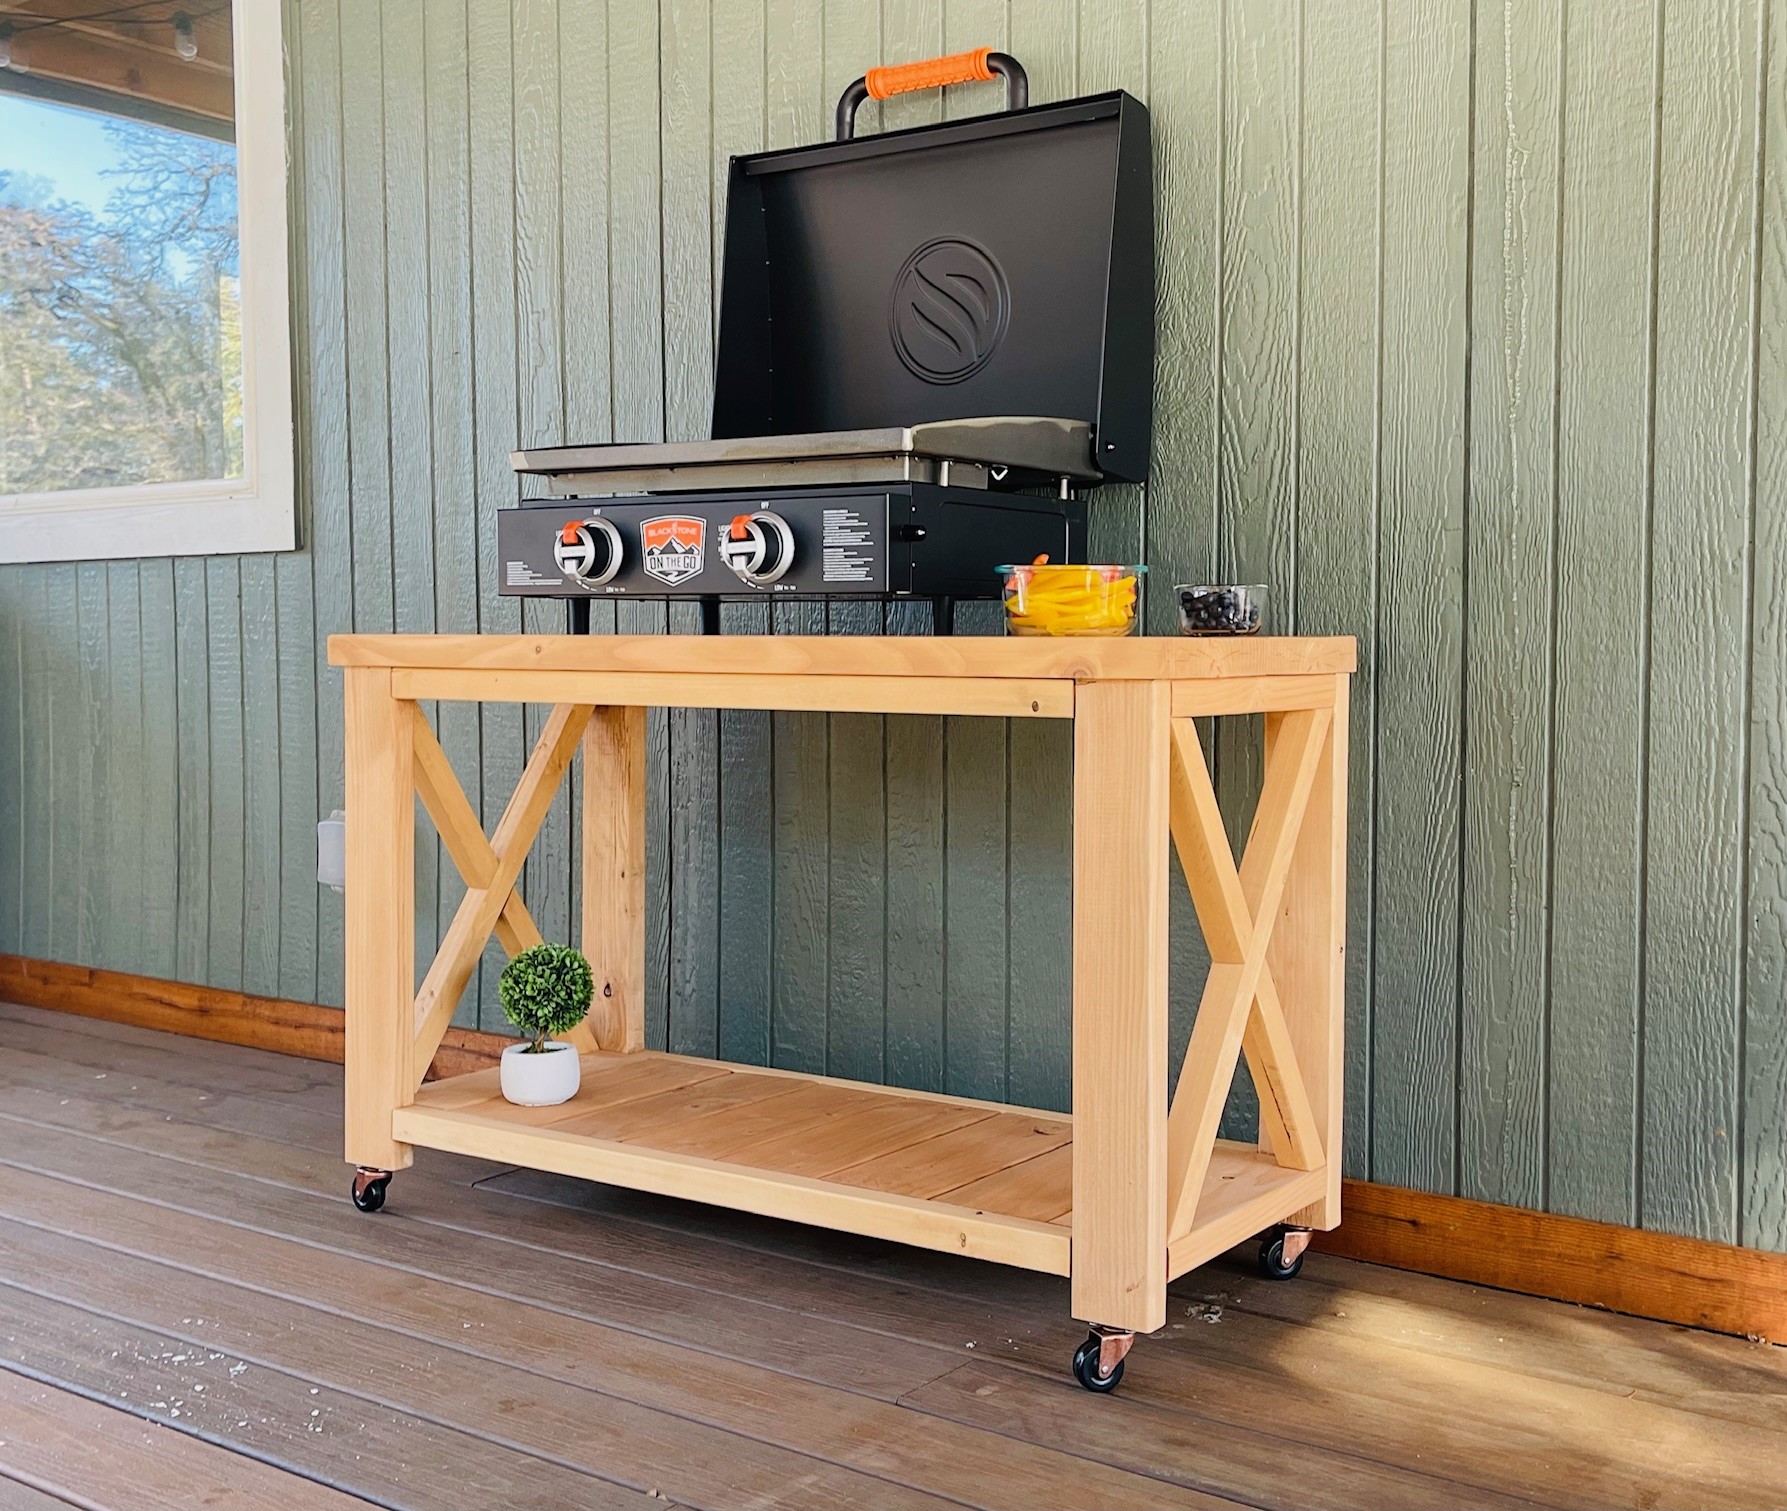 outdoor grill wood cart